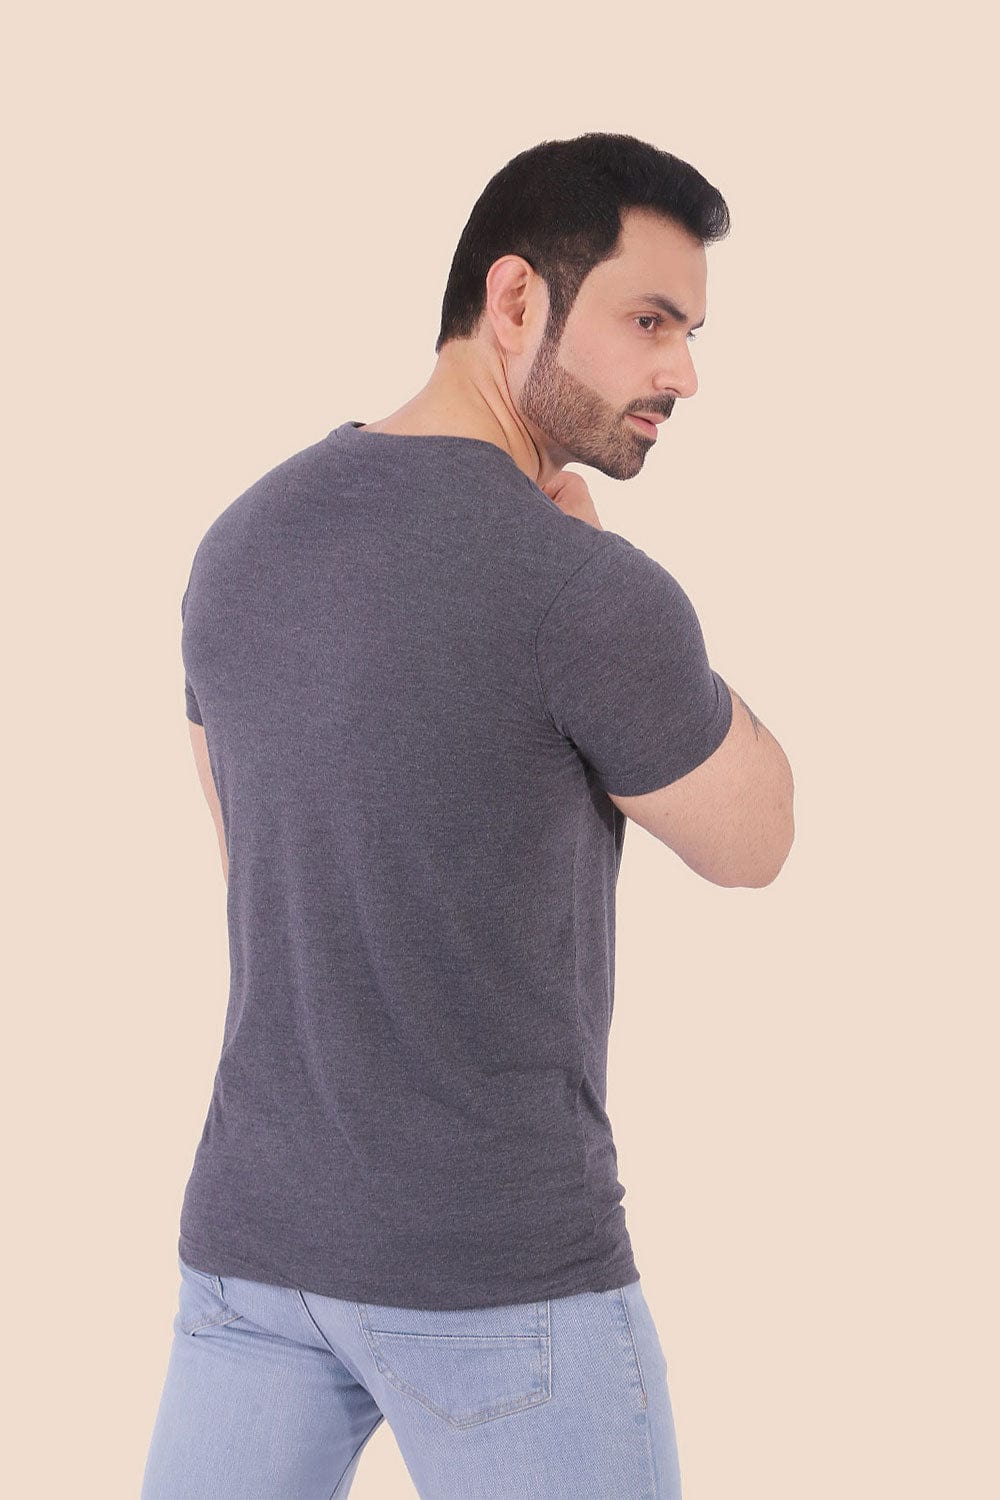 Hope Not Out by Shahid Afridi Men T-Shirt Grey Lounge Wear Tee